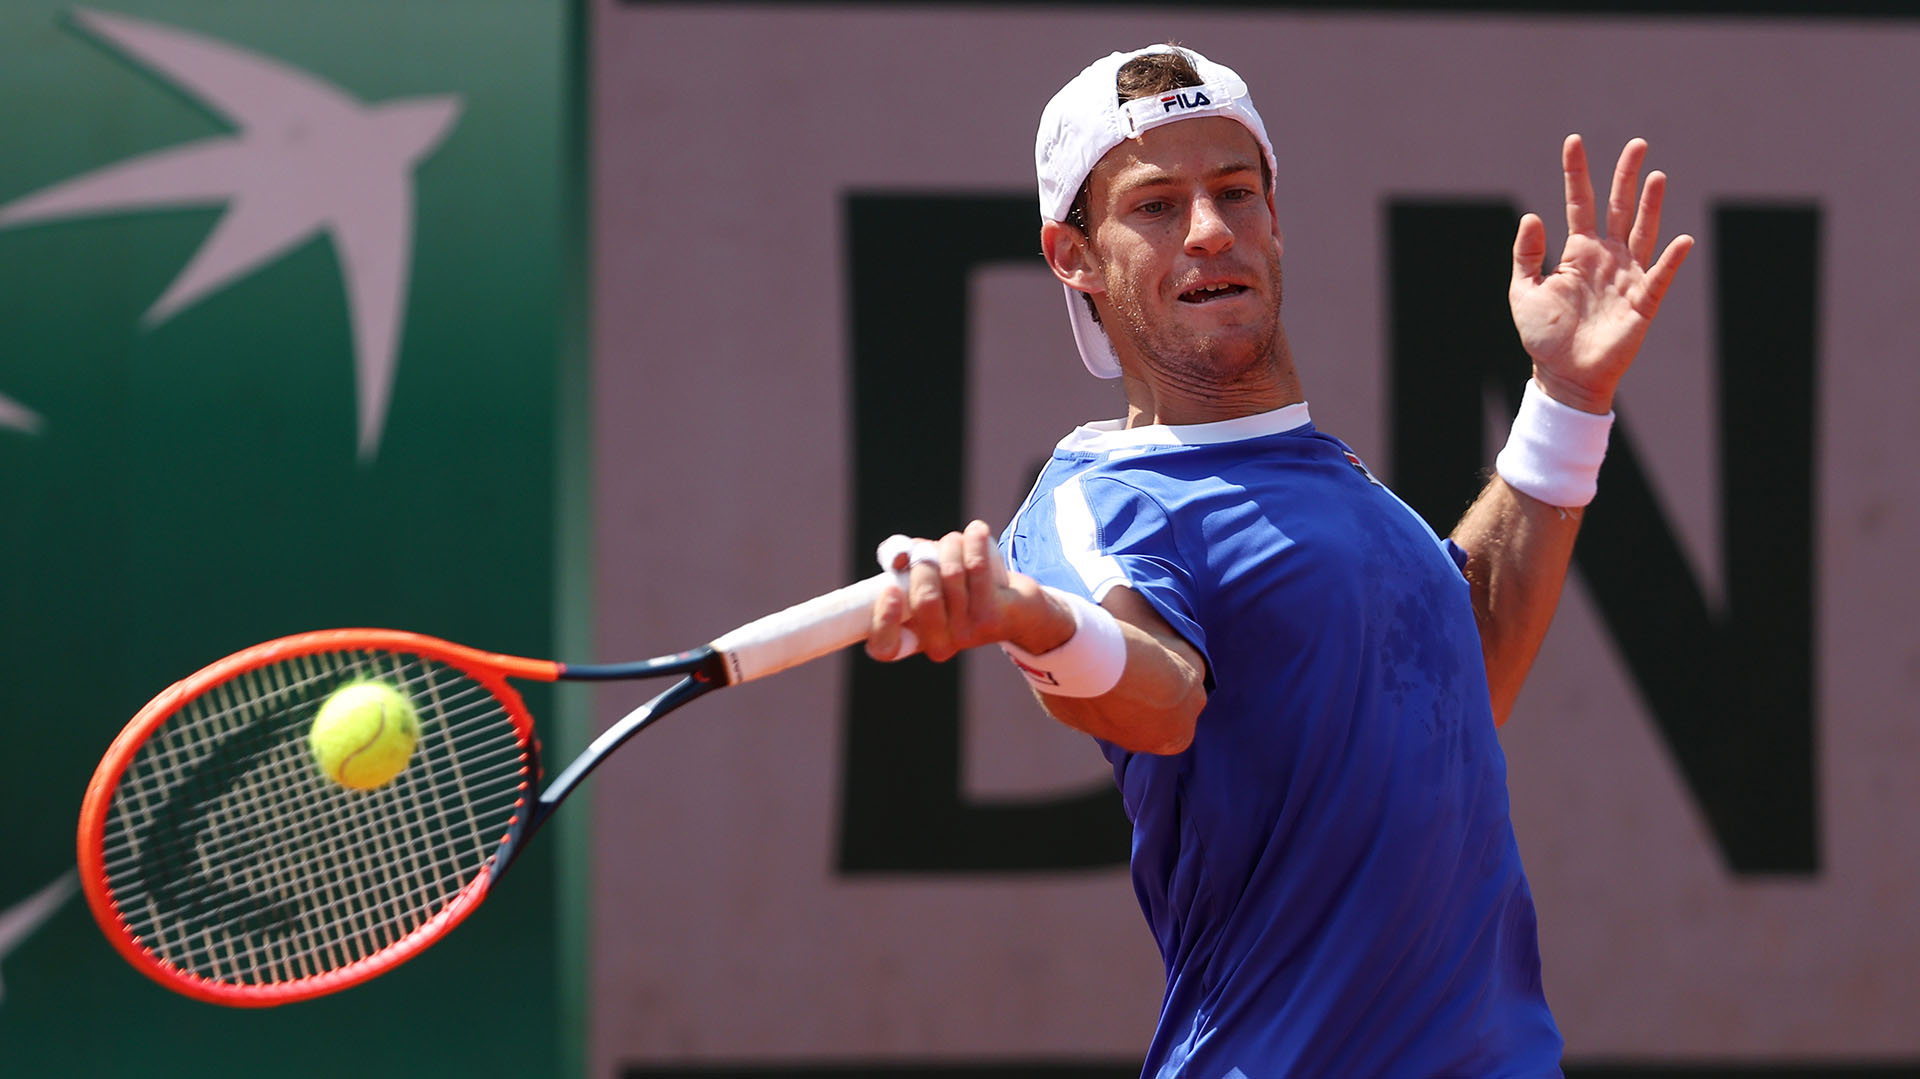 PARIS, FRANCE - MAY 29: Diego Schwartzman of Argentina plays a forehand against Bernabe Zapata Miralles of Spain during their Men's Singles First Round Match on Day Two of the 2023 French Open at Roland Garros on May 29, 2023 in Paris, France. (Photo by Julian Finney/Getty Images)